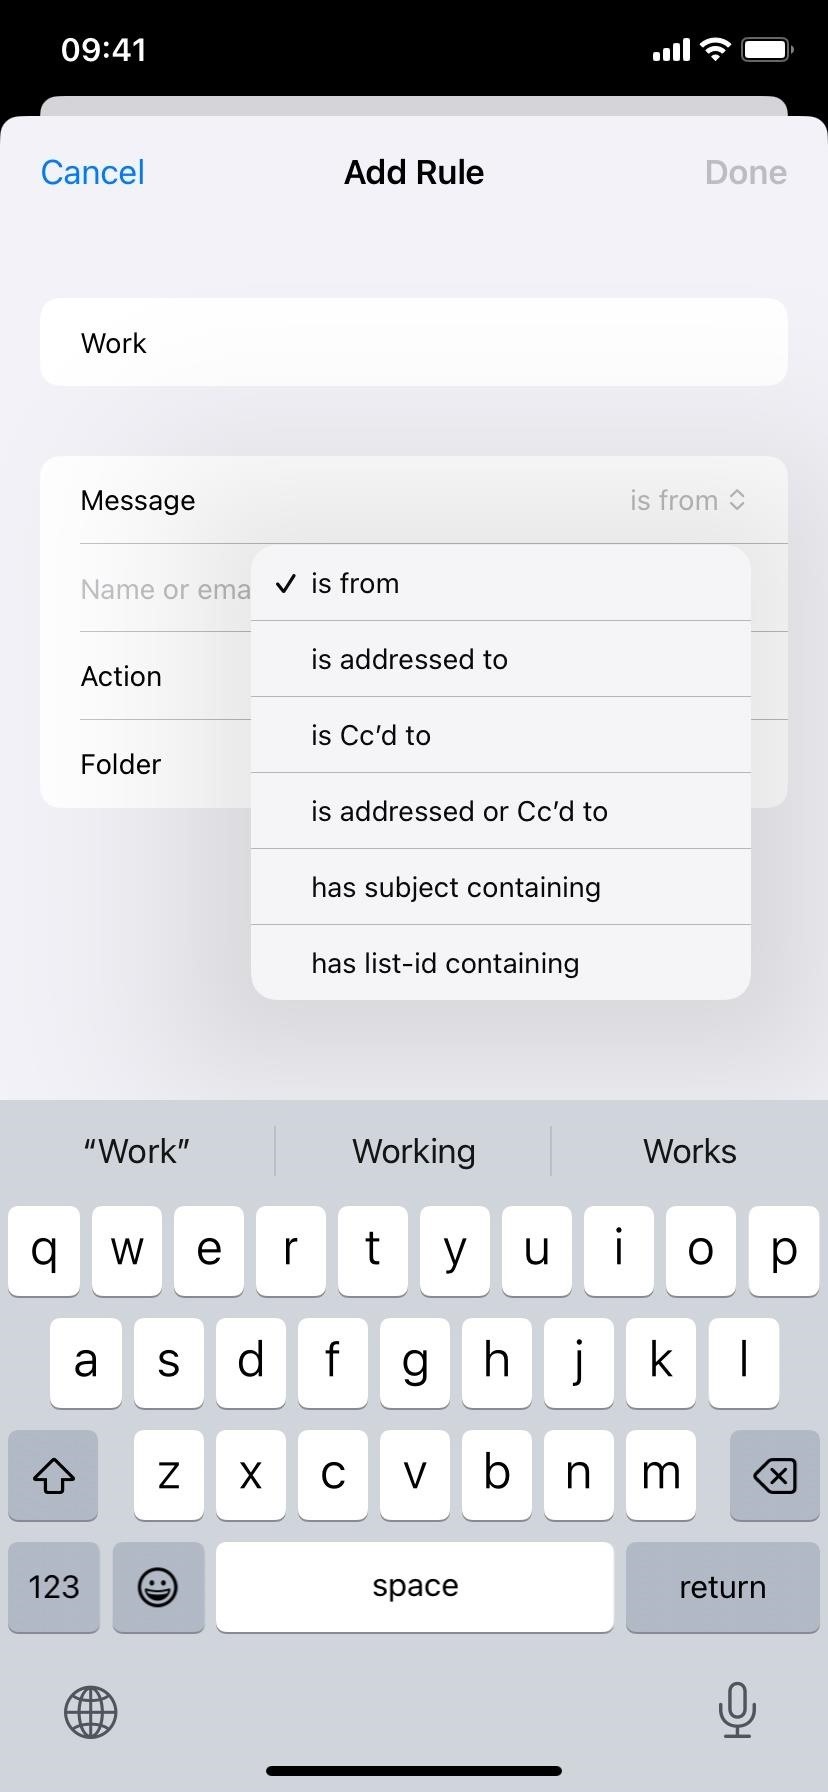 Create Unlimited iCloud Email Address Variations to Take Total Control Over Your iCloud Mail Inbox